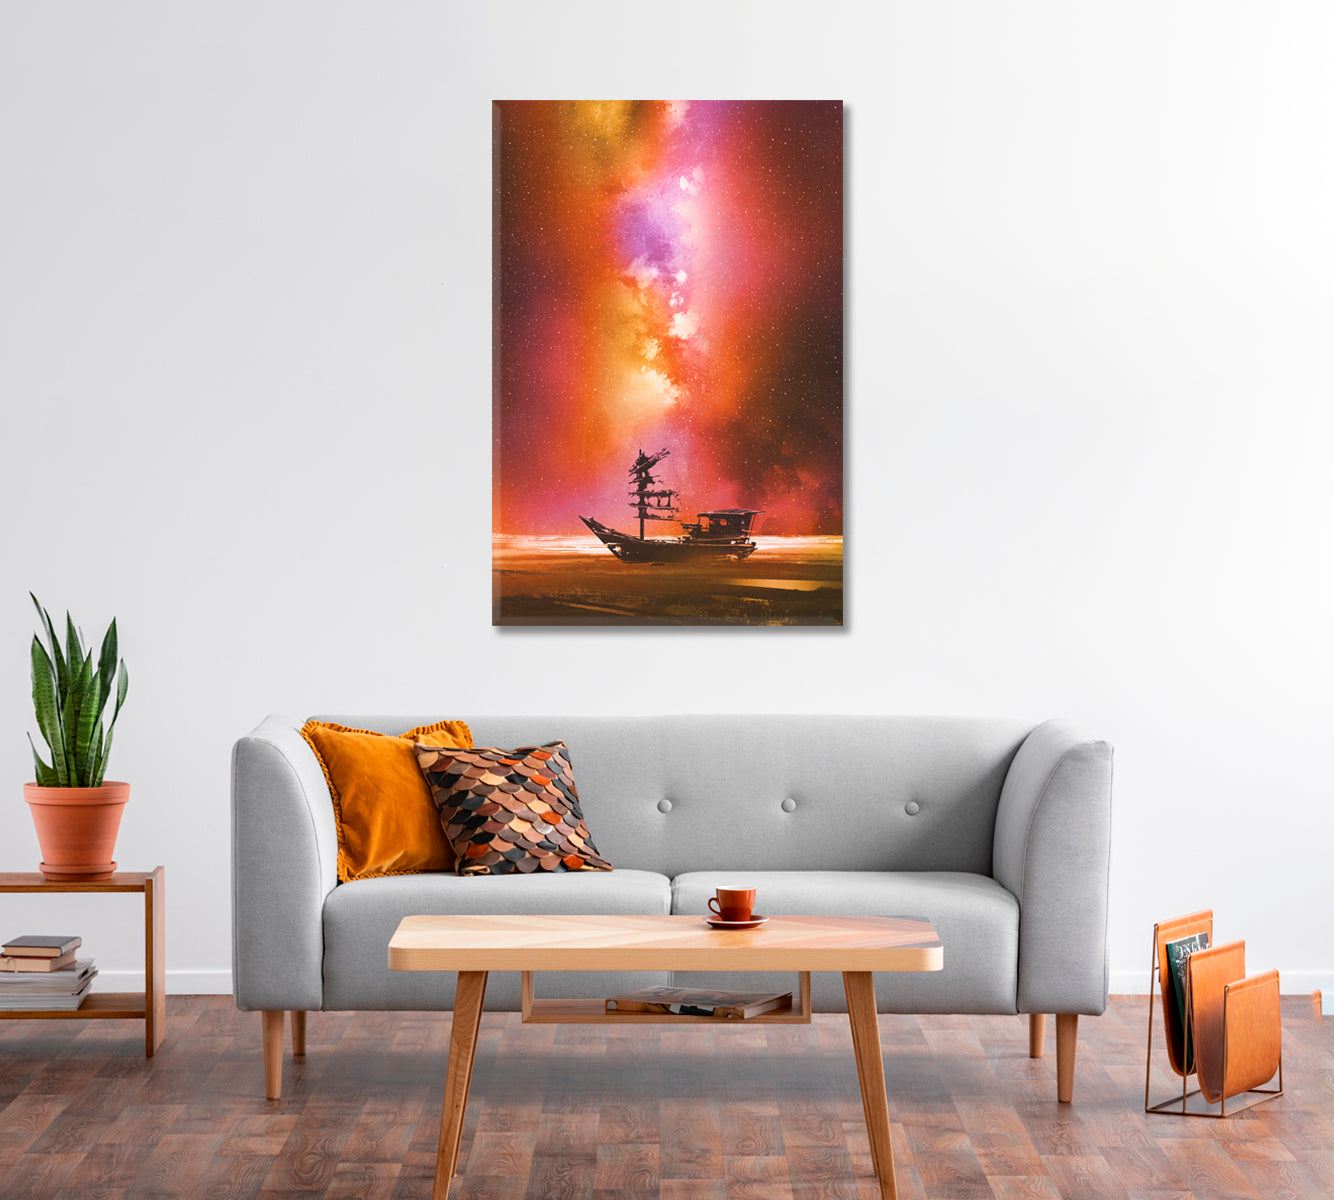 Abandoned Boat Art for Living Room-Canvas Print-CetArt-1 panel-16x24 inches-CetArt